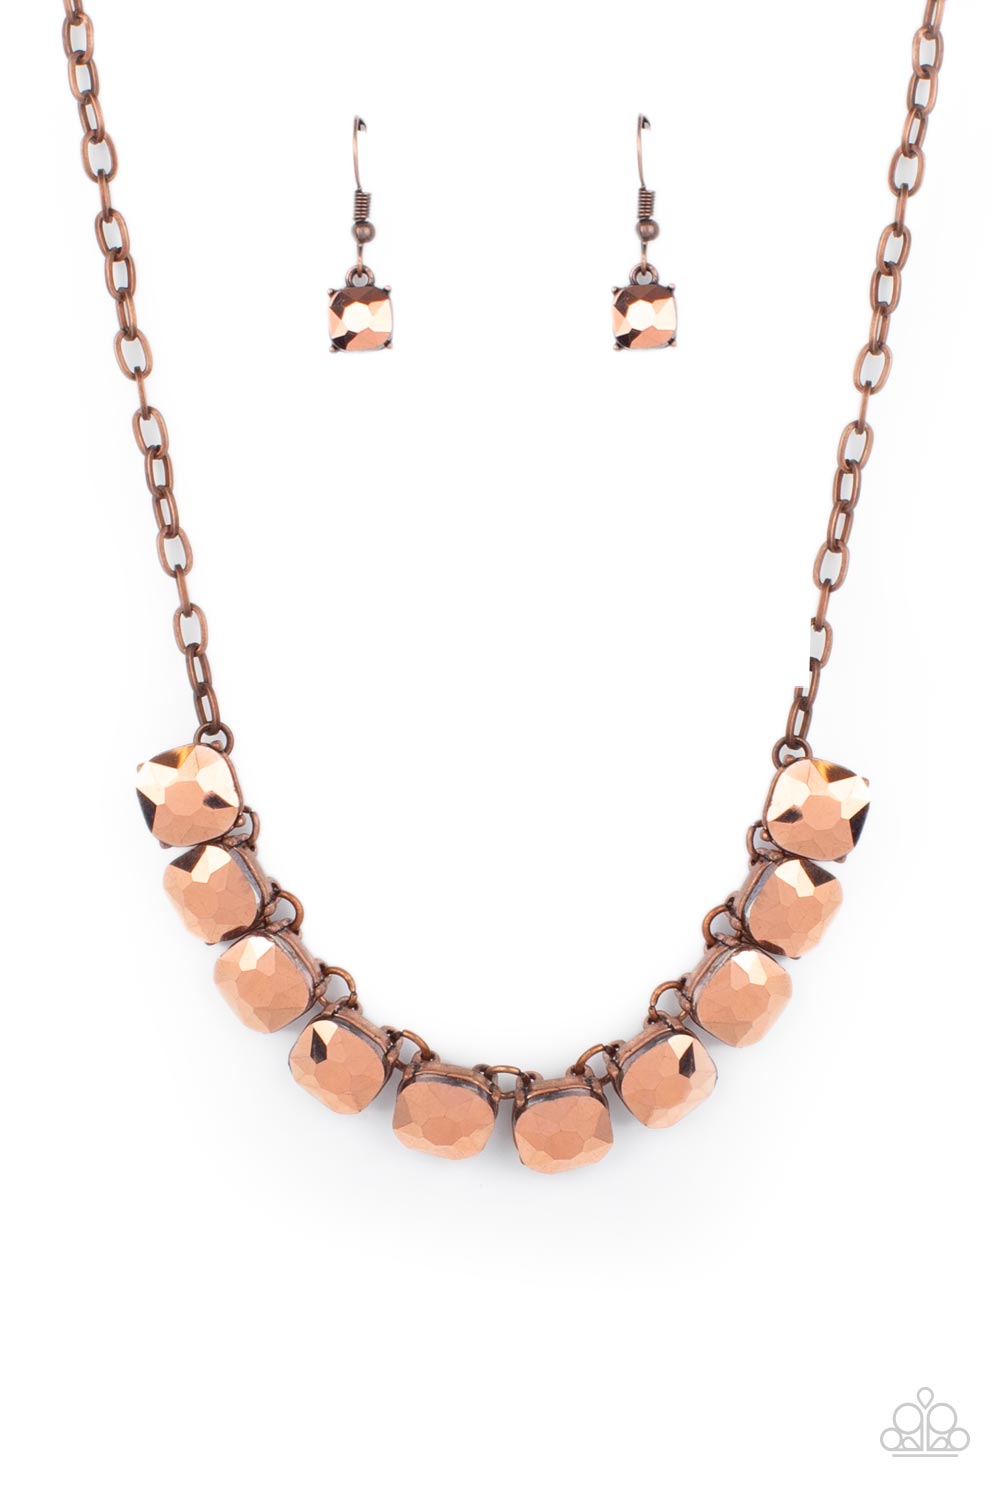 Radiance Squared - Copper necklace 631